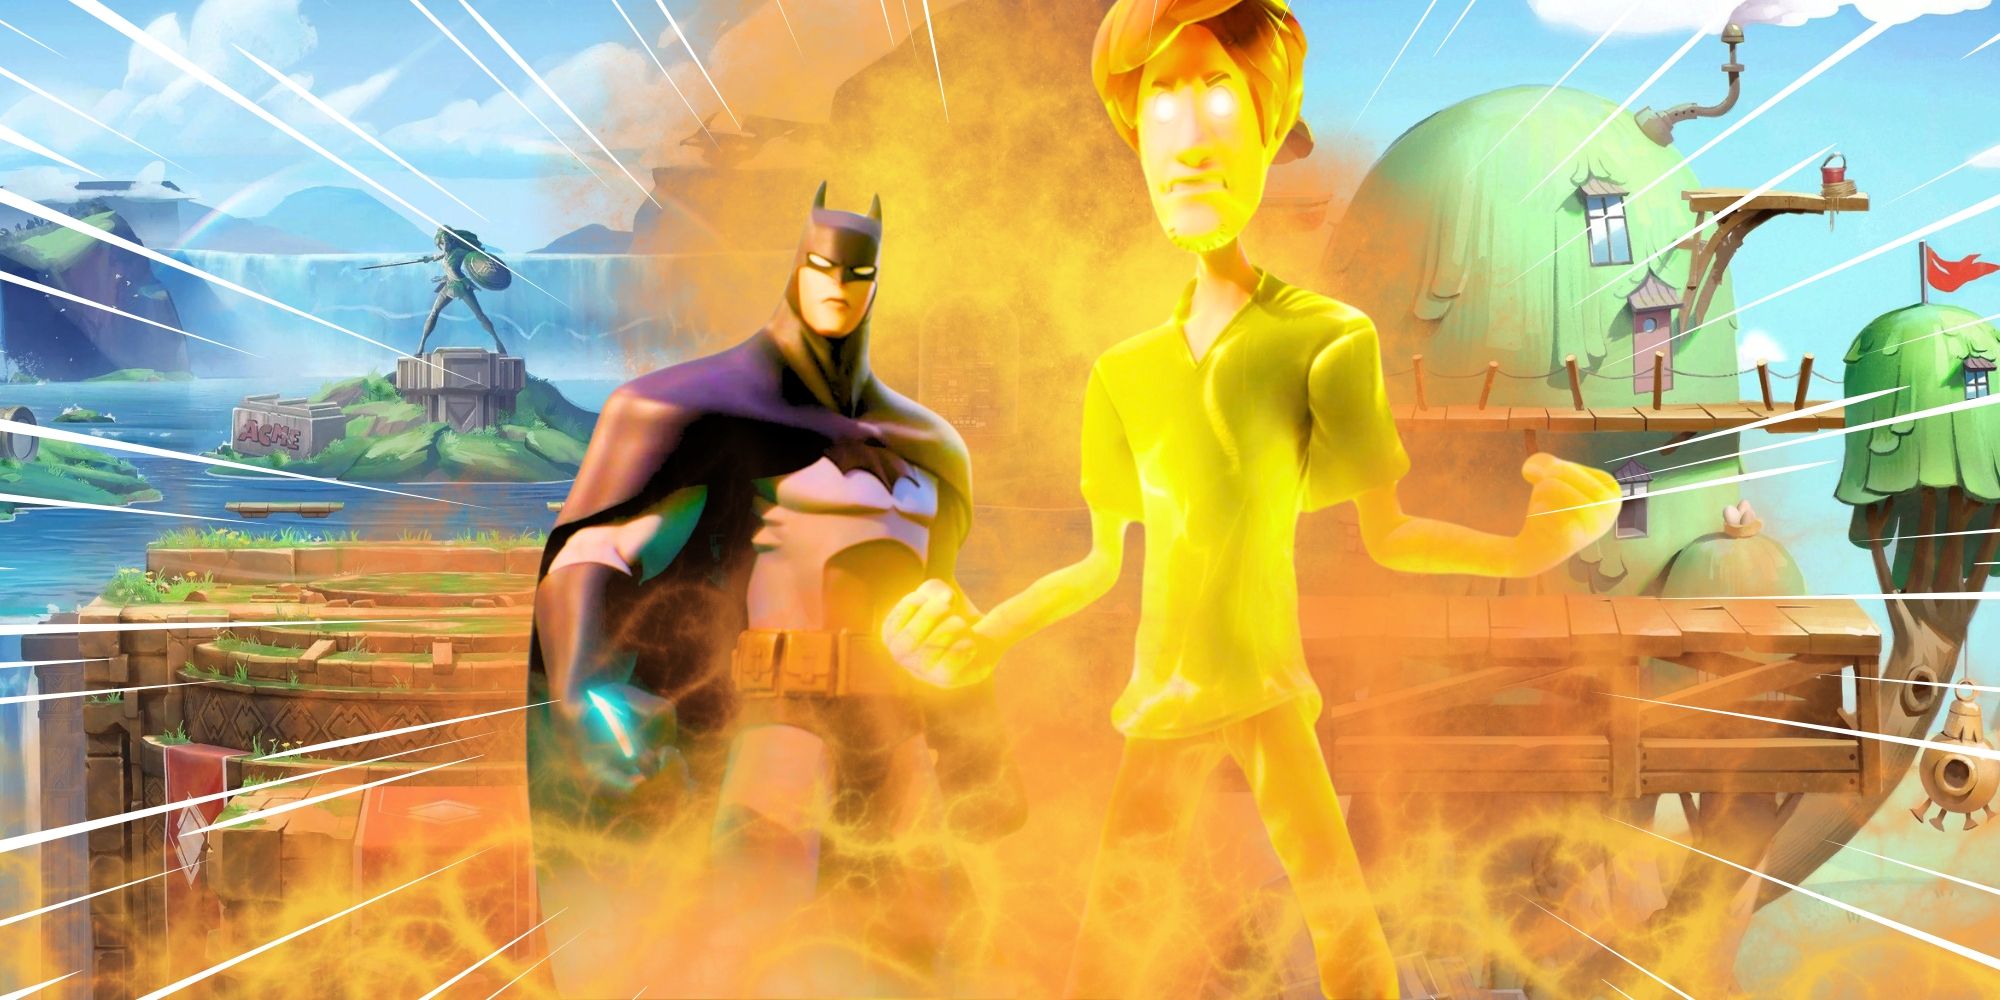 Batman and Shaggy from MultiVersus with a fiery background.